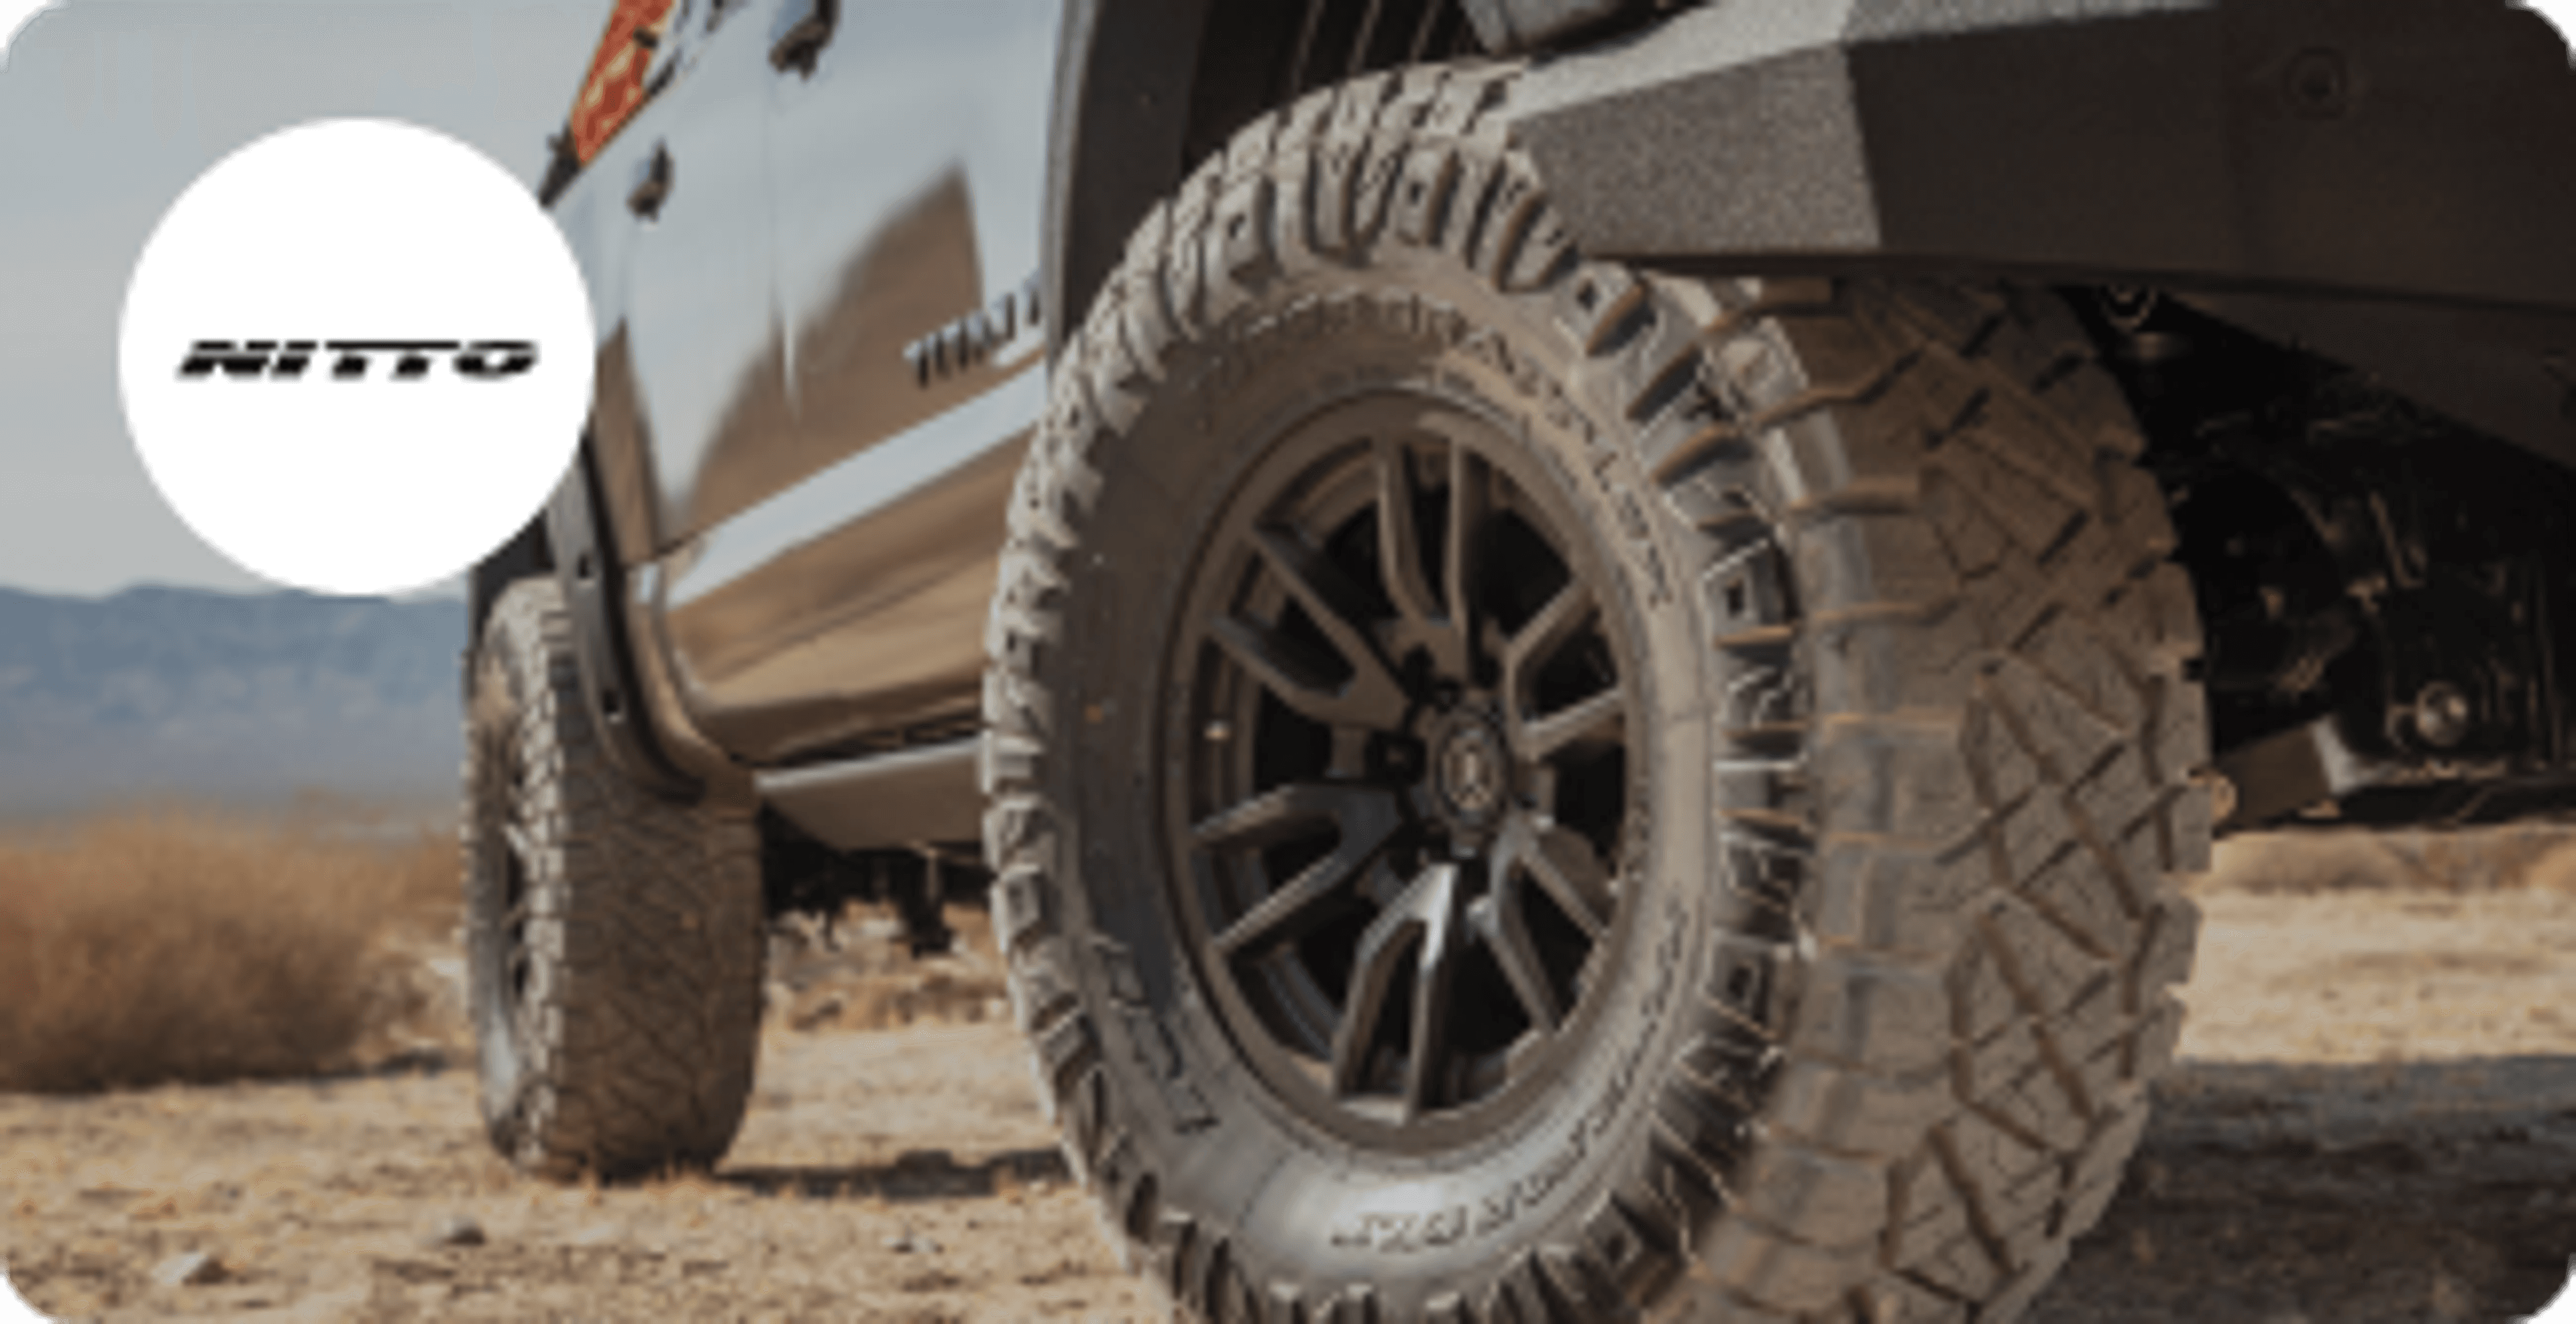 Save $100 instantly in-cart with Nitto when you purchase 4 or more eligible tires